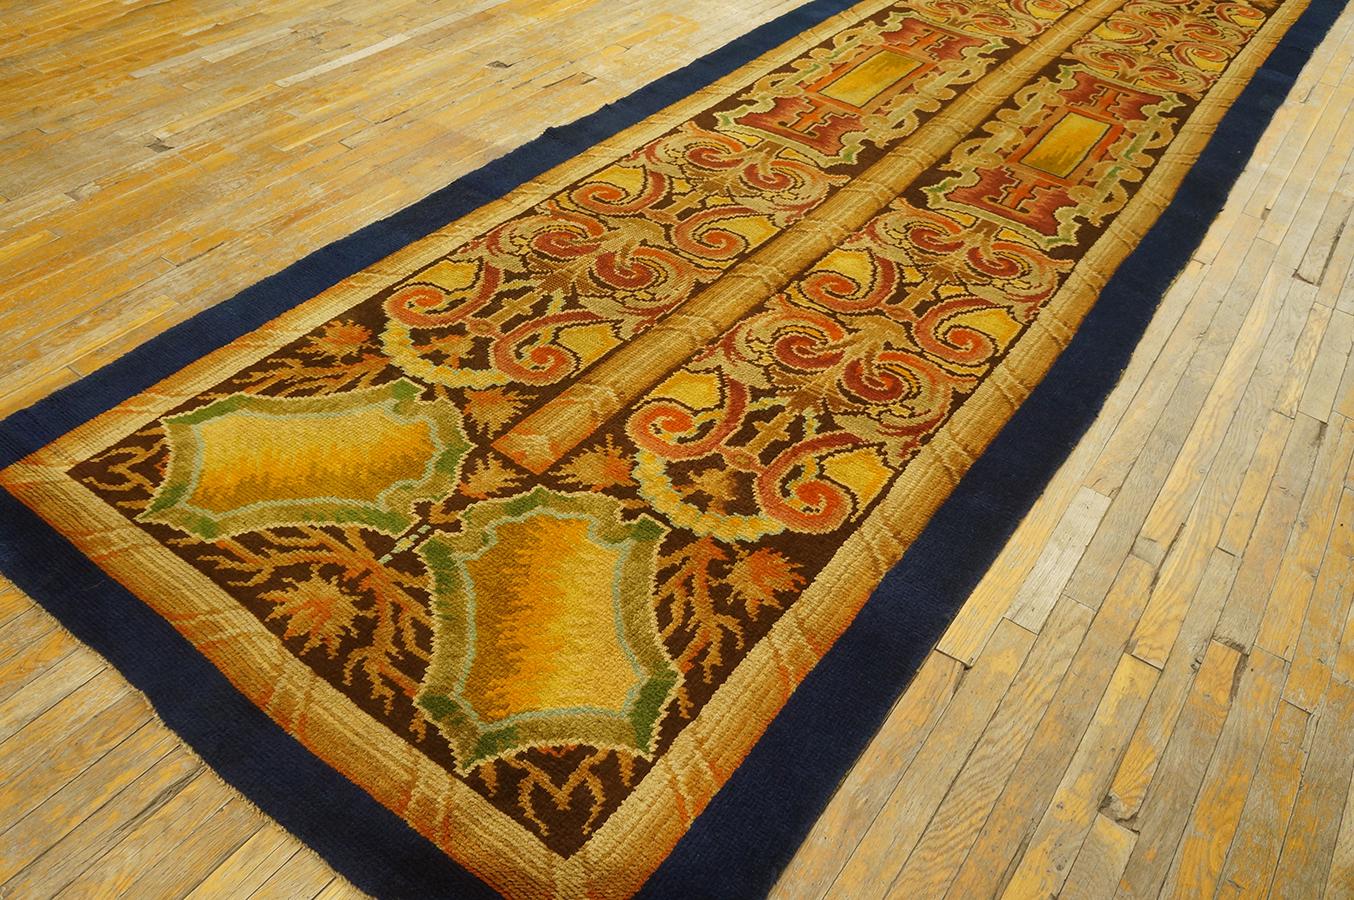 Wool Early 20th Century English Axminster Carpet ( 4'9